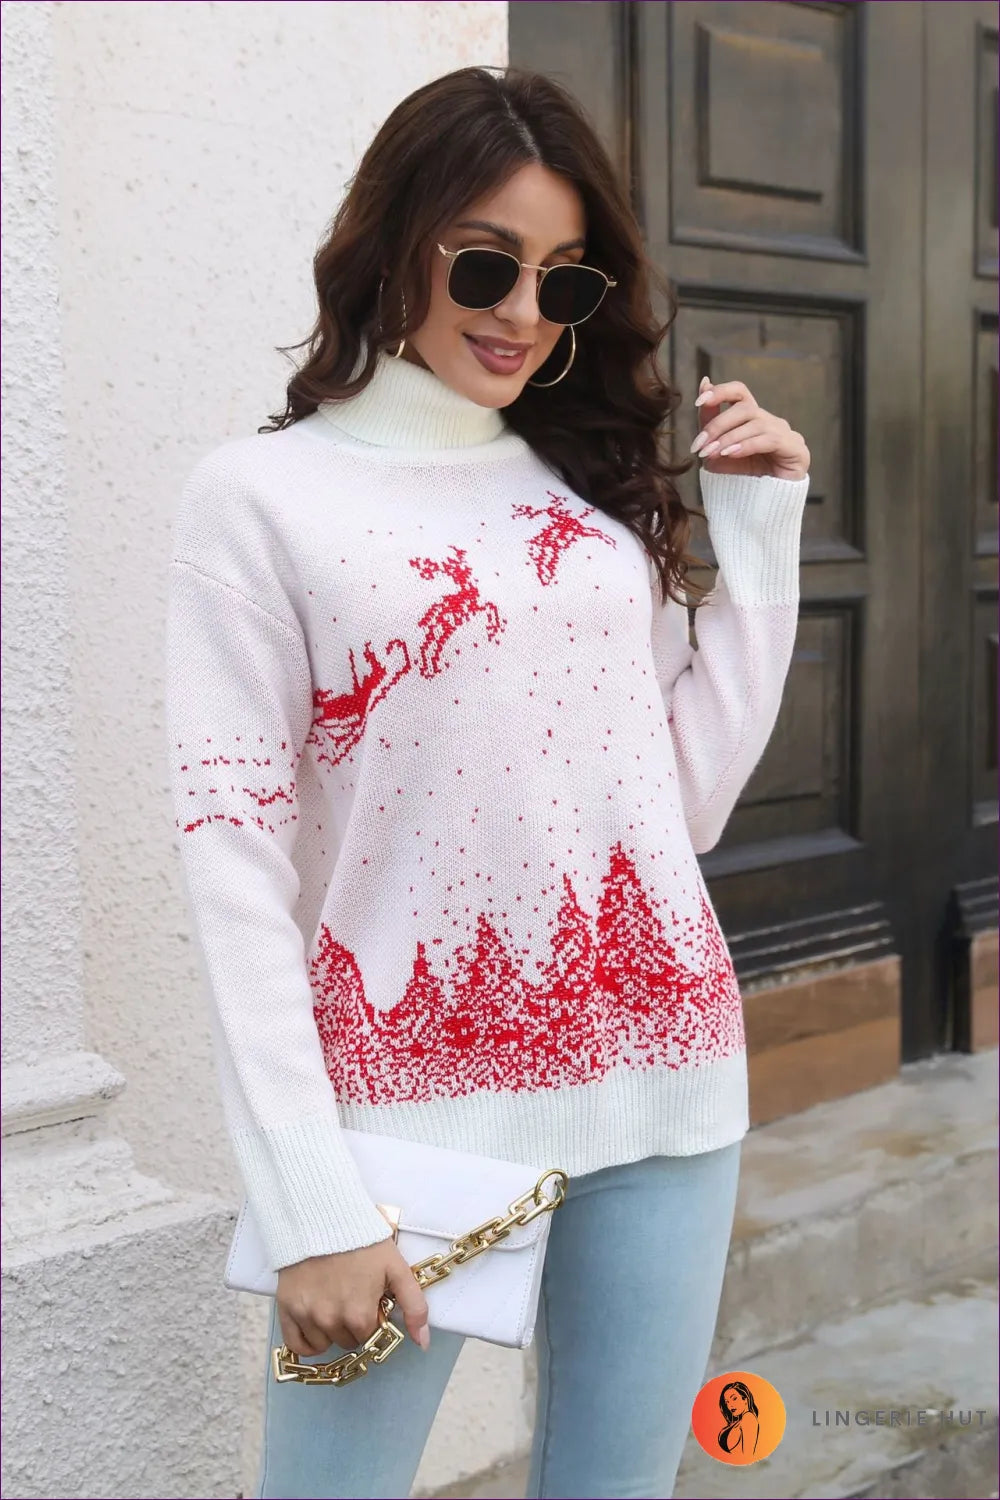 Elevate Your Holiday Style With Lingerie Hut’s Elegant Christmas Turtleneck Sweater. Limited Edition—order